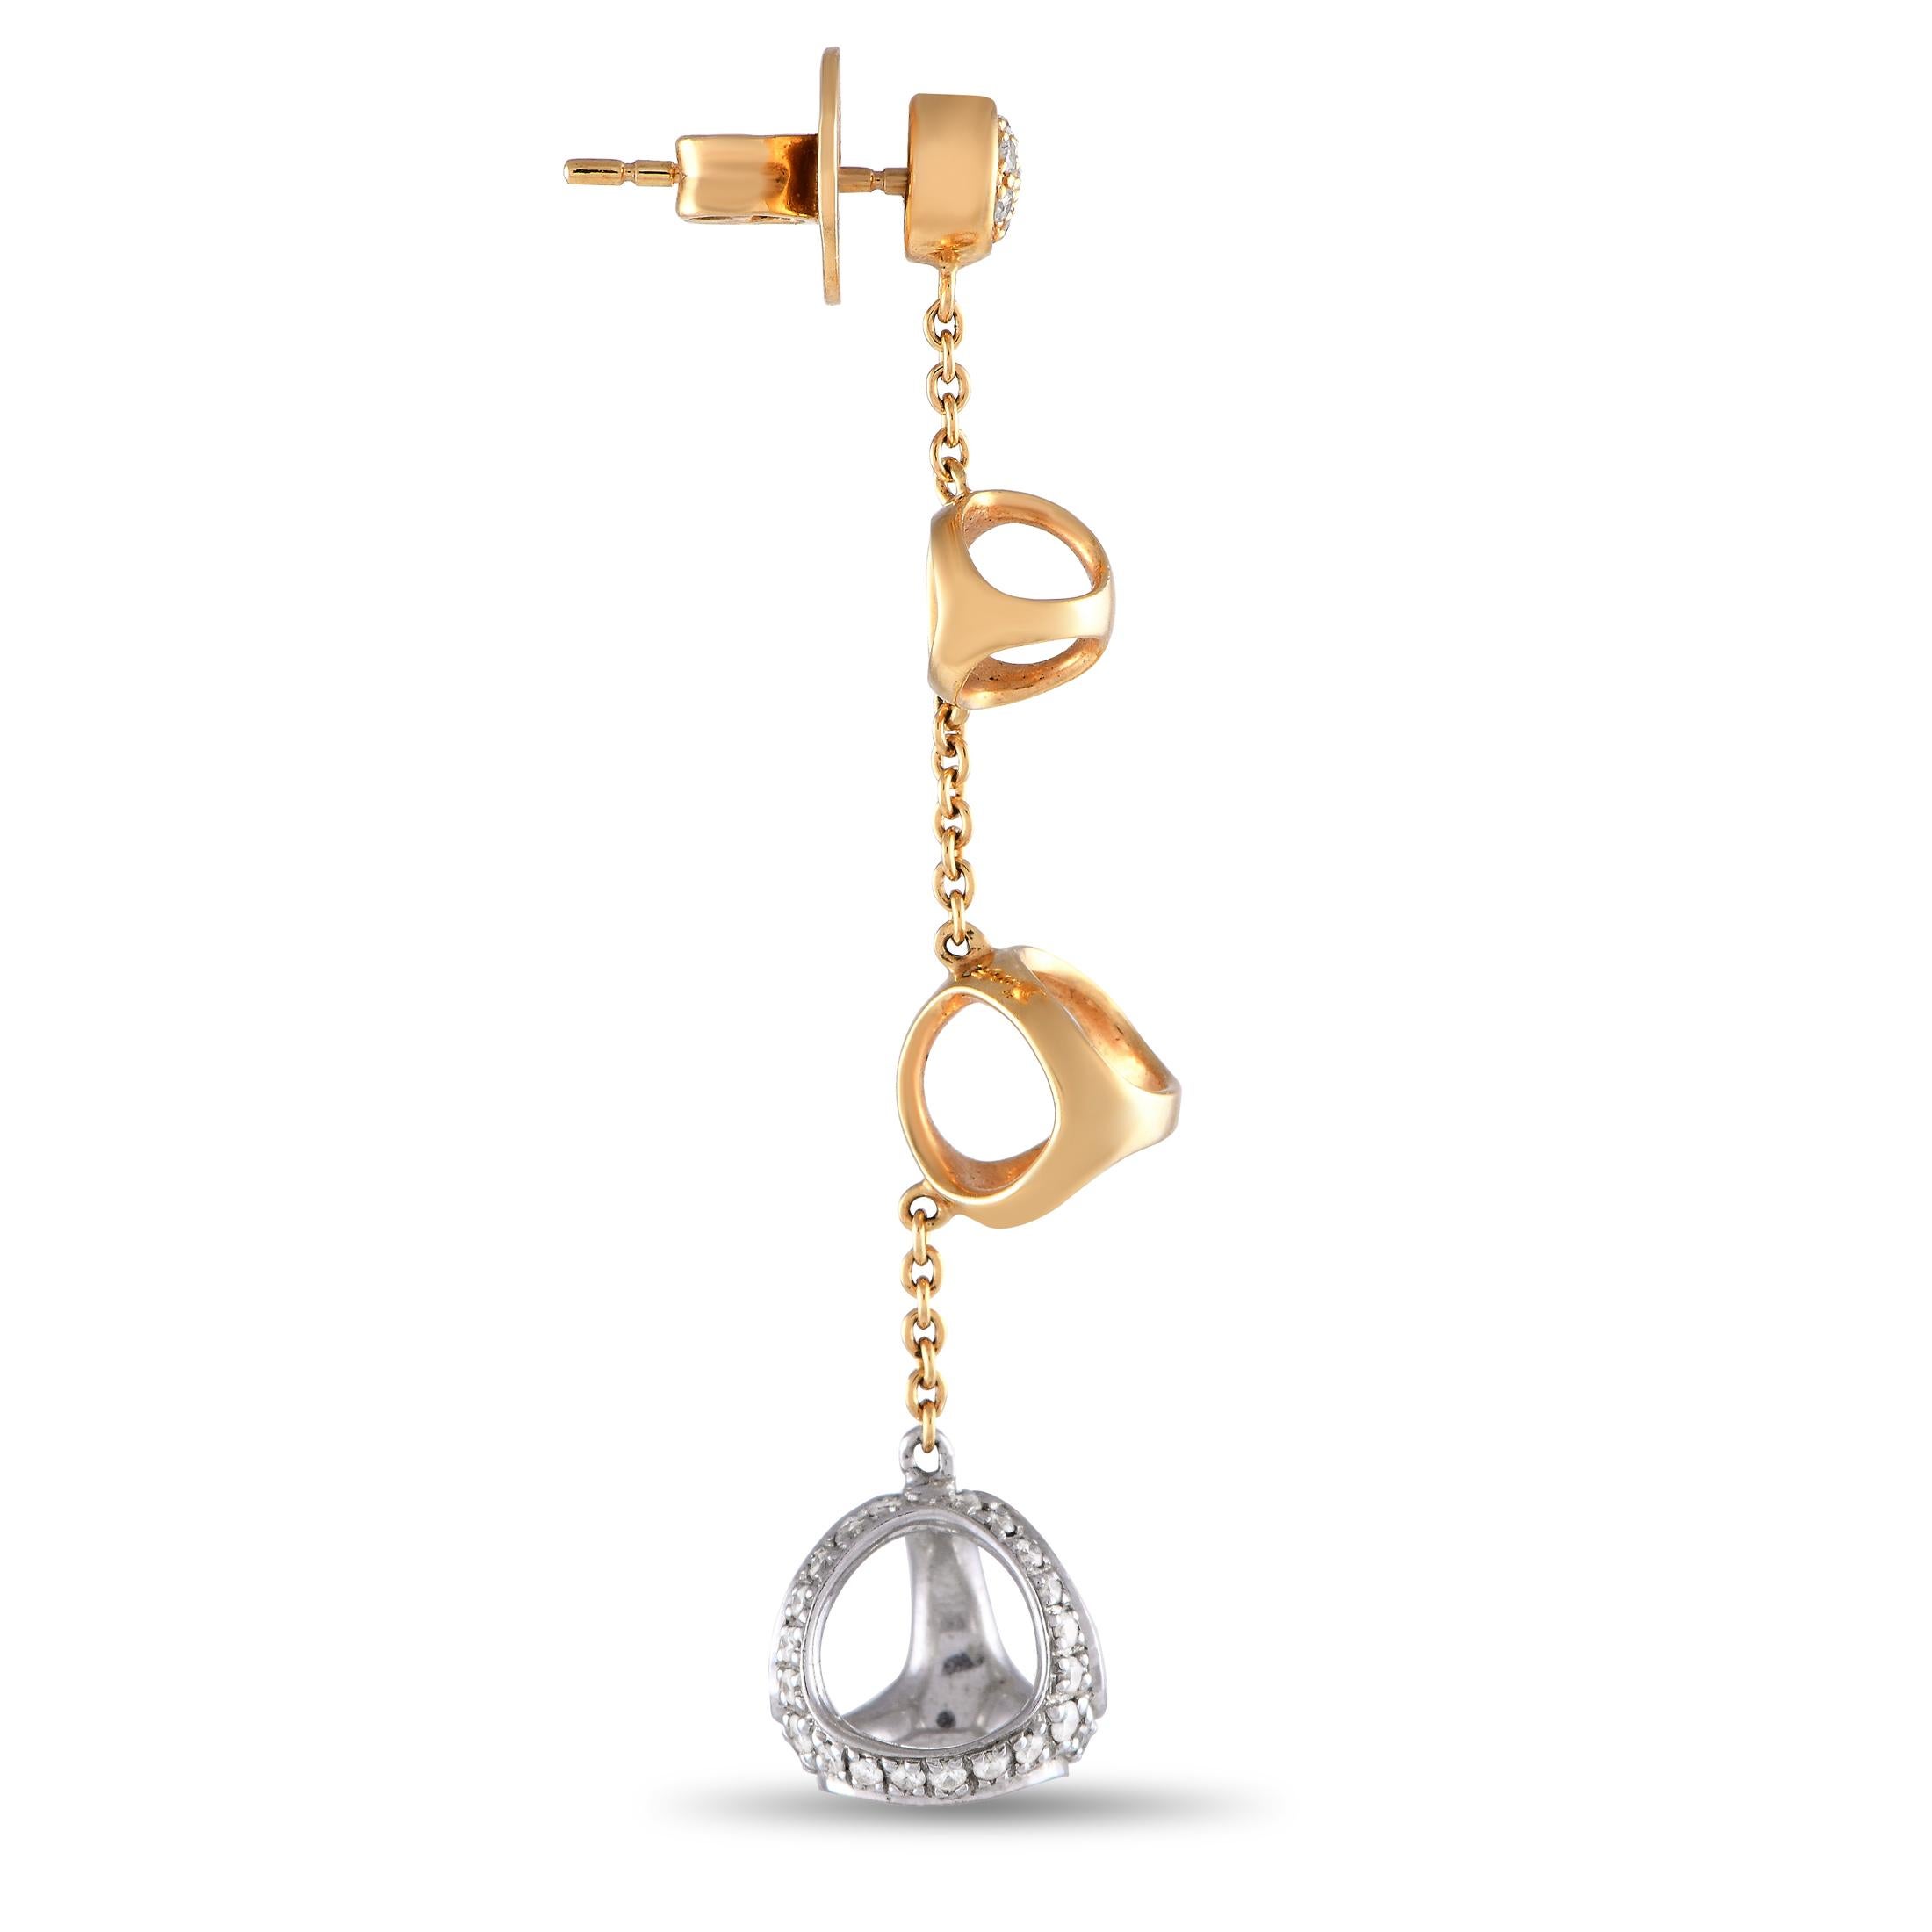 From Italian luxury jewelry brand Di MODOLO, here is a pair of dangling earrings that are timeless and modern at once. These dazzling danglers feature a round post with a cluster of diamonds at the center and a push-back closure. Dangling from each